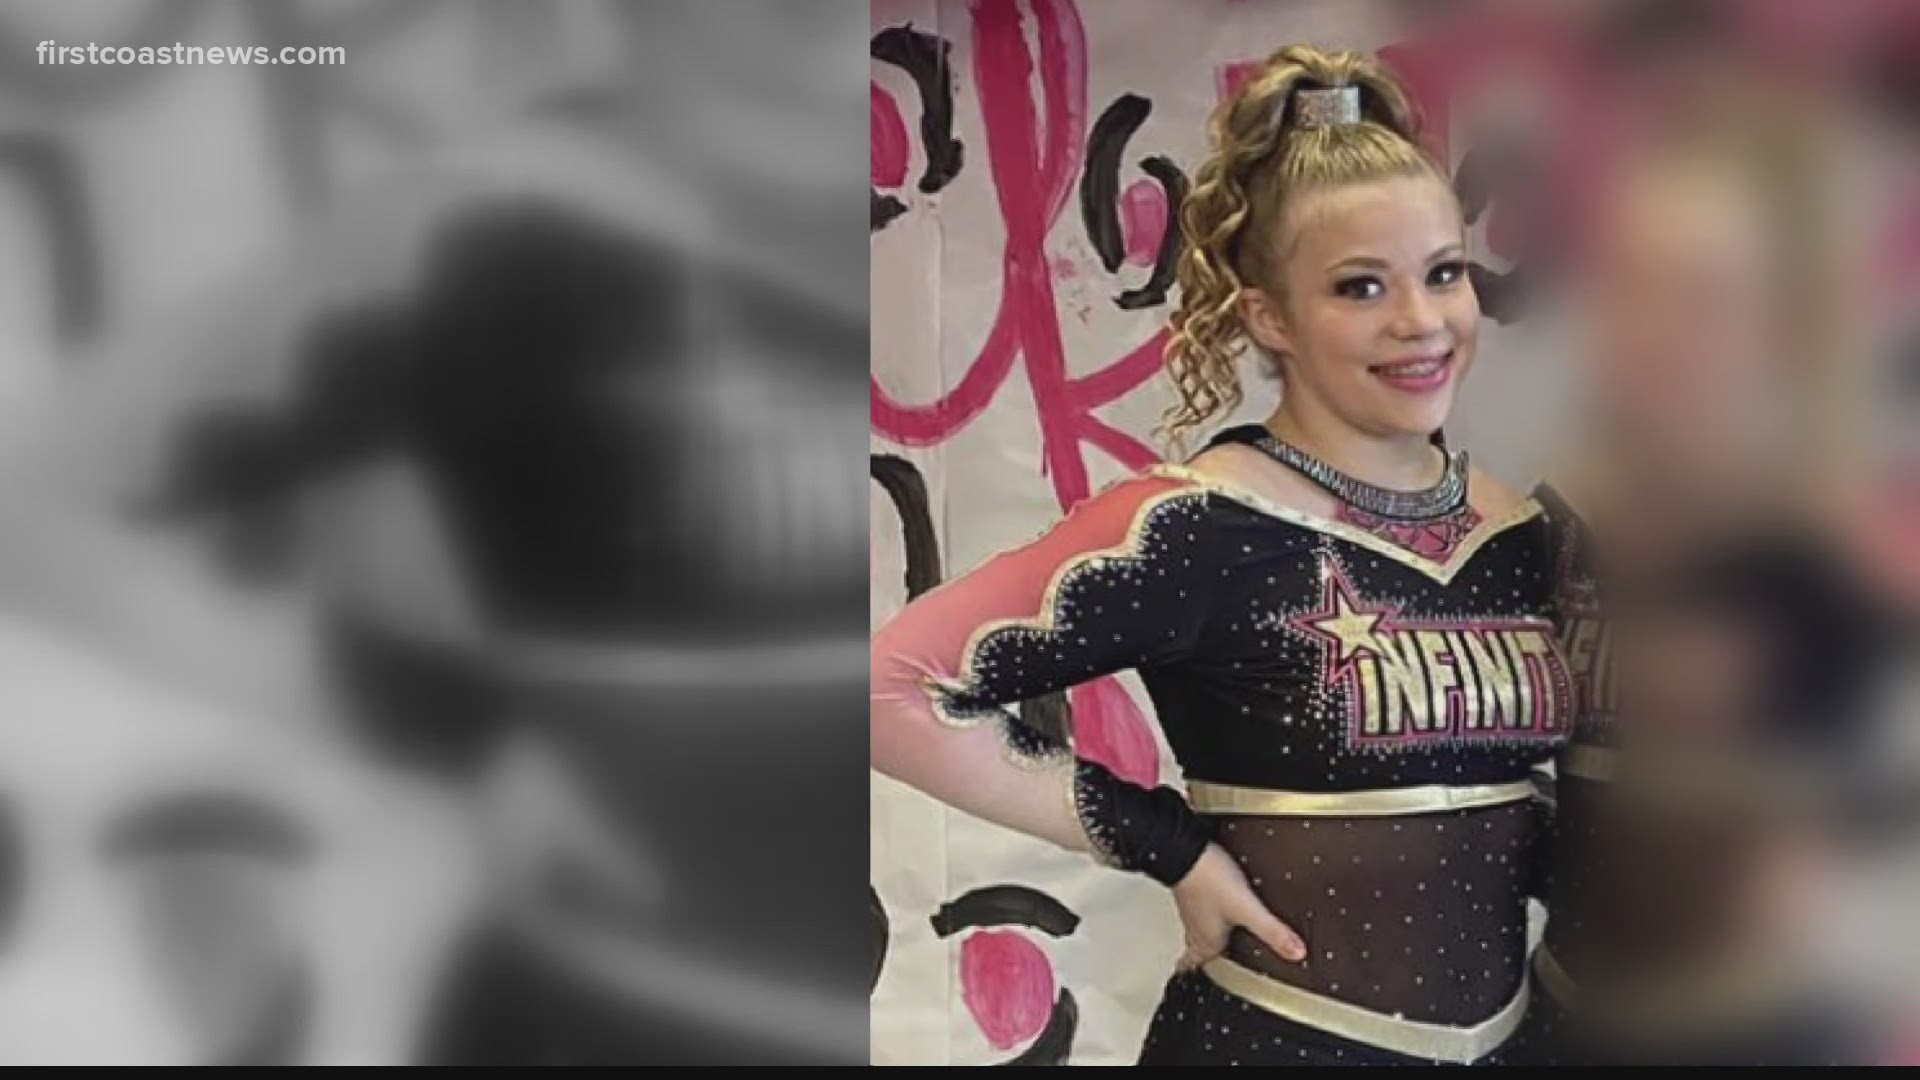 The family of 13-year-old Tristyn Bailey says they want her spirit to be kept alive. Her cheer coach says she hopes justice is served.